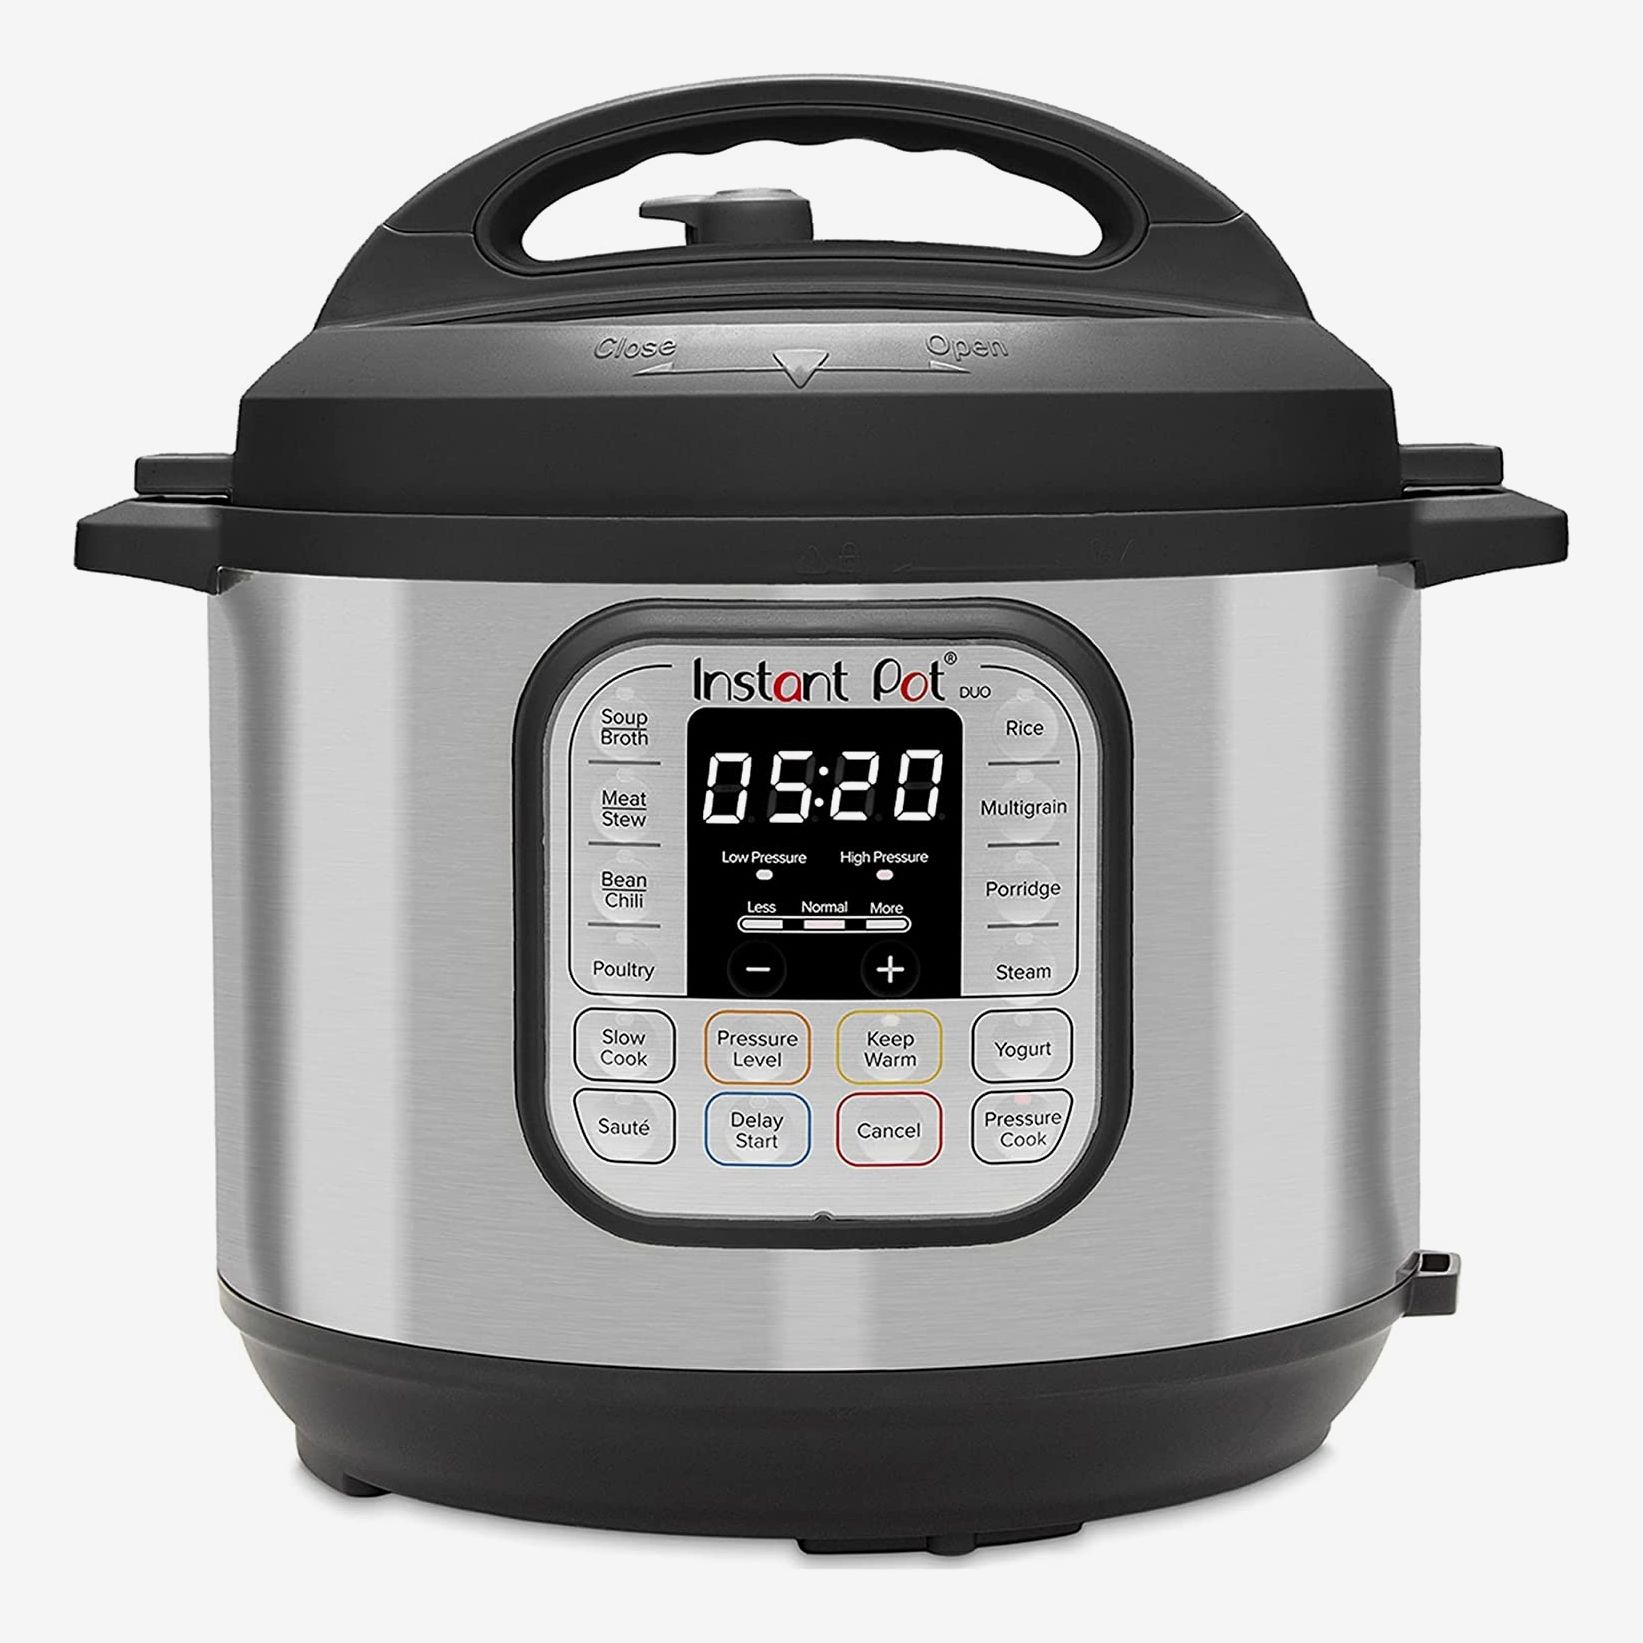 Best pressure cookers for 2021 - 11 tried and tested models